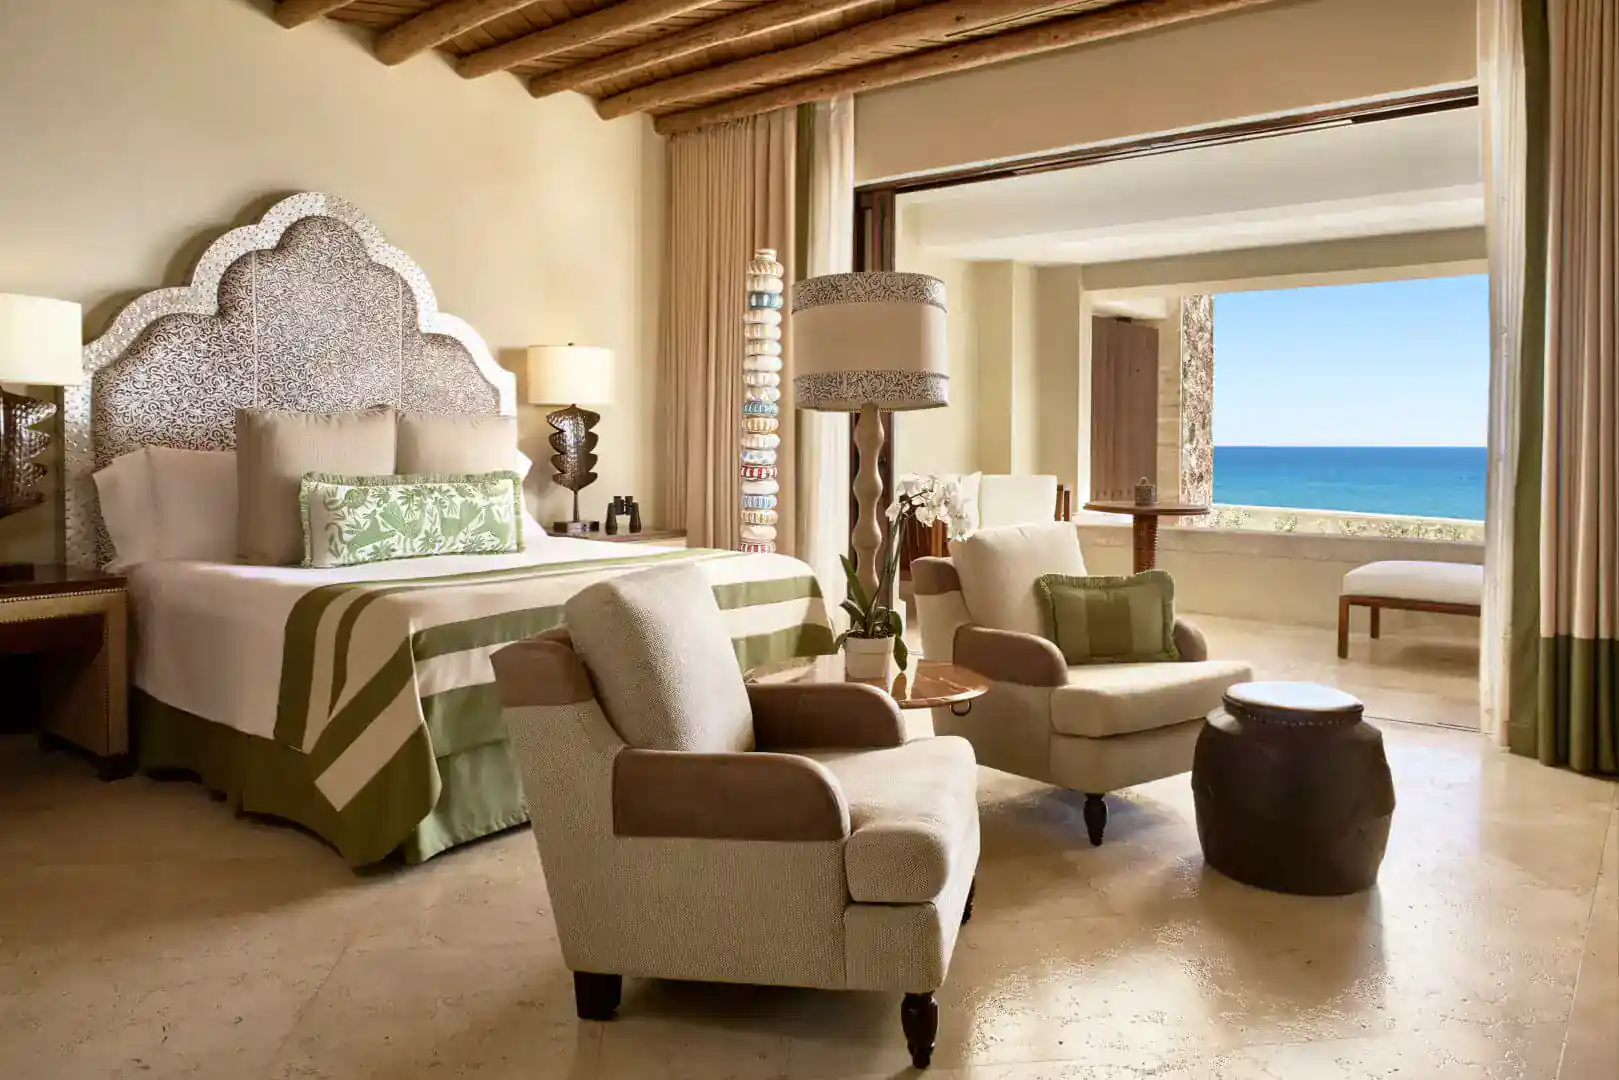 Waldorf Astoria Los Cabos Pedregal  Hotel and “Ocean View King Bed” Room  Tour 